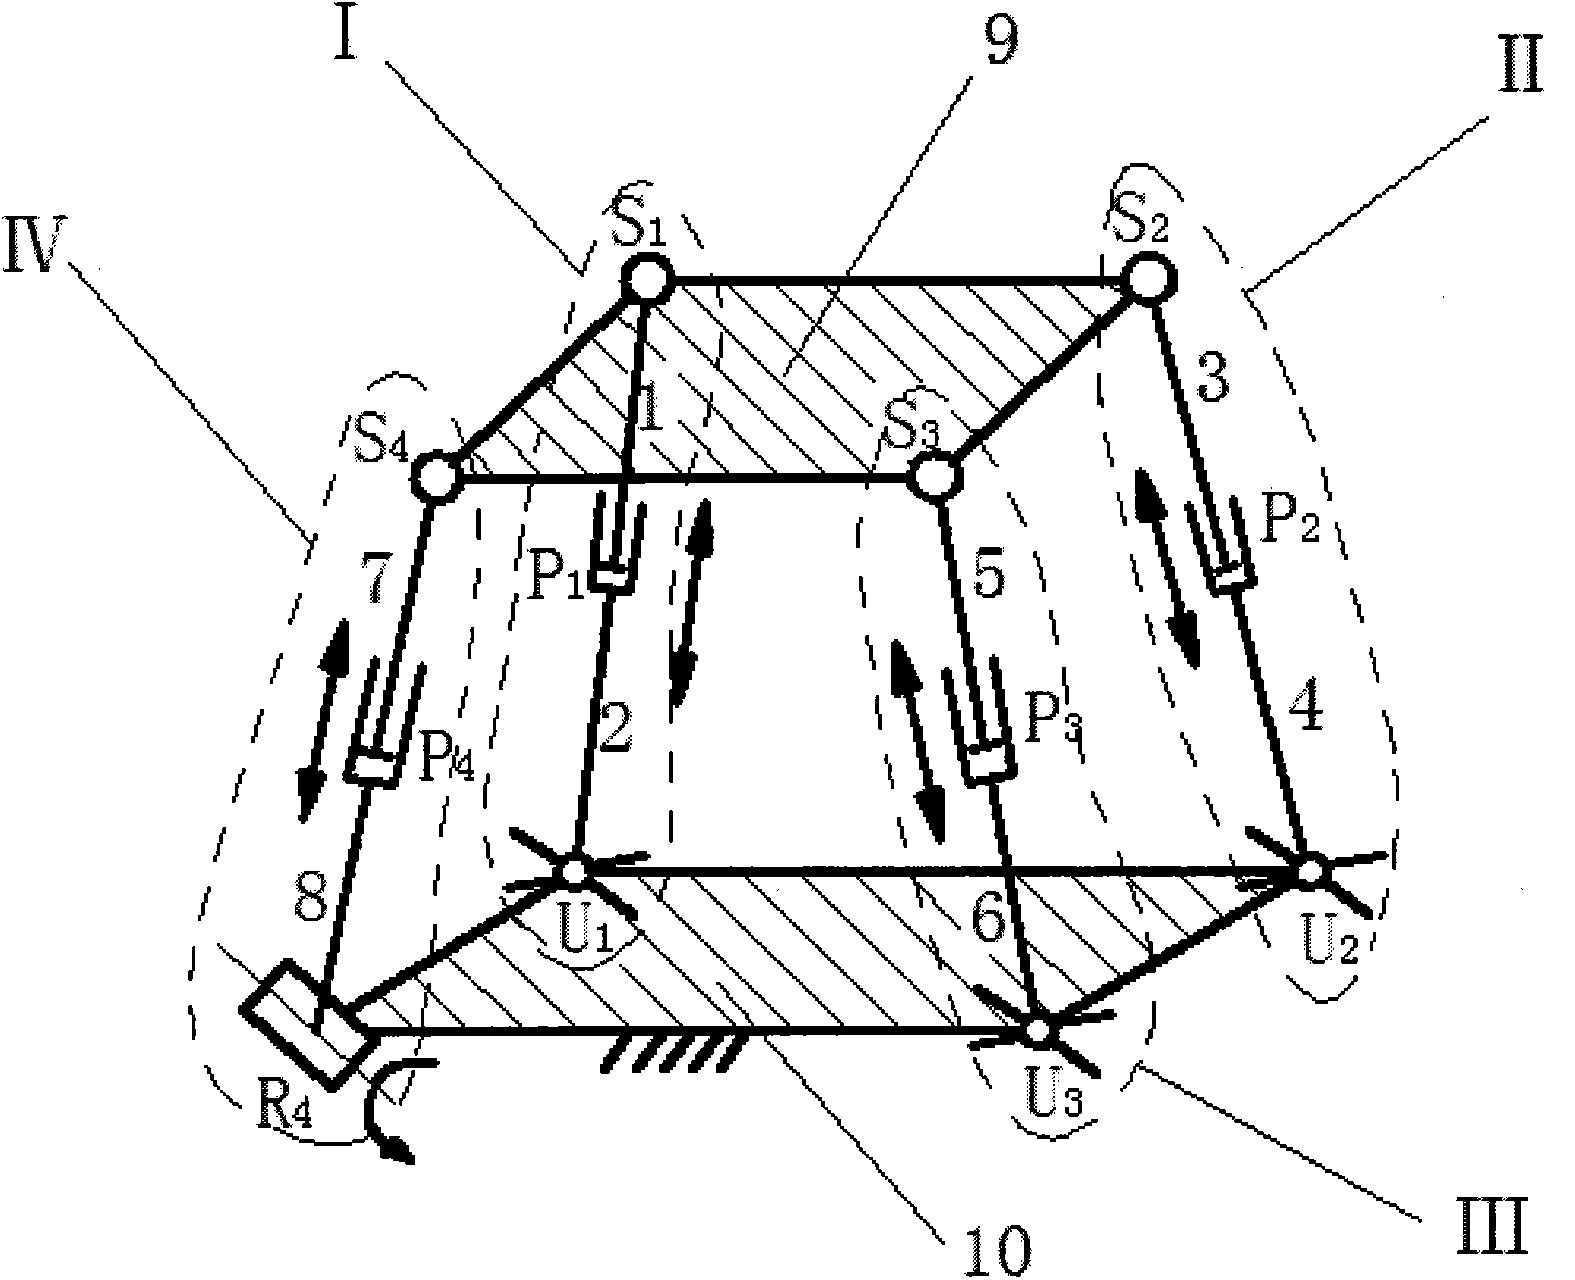 Two-translation-and-three-turning parallel mechanism used for virtual machine tool